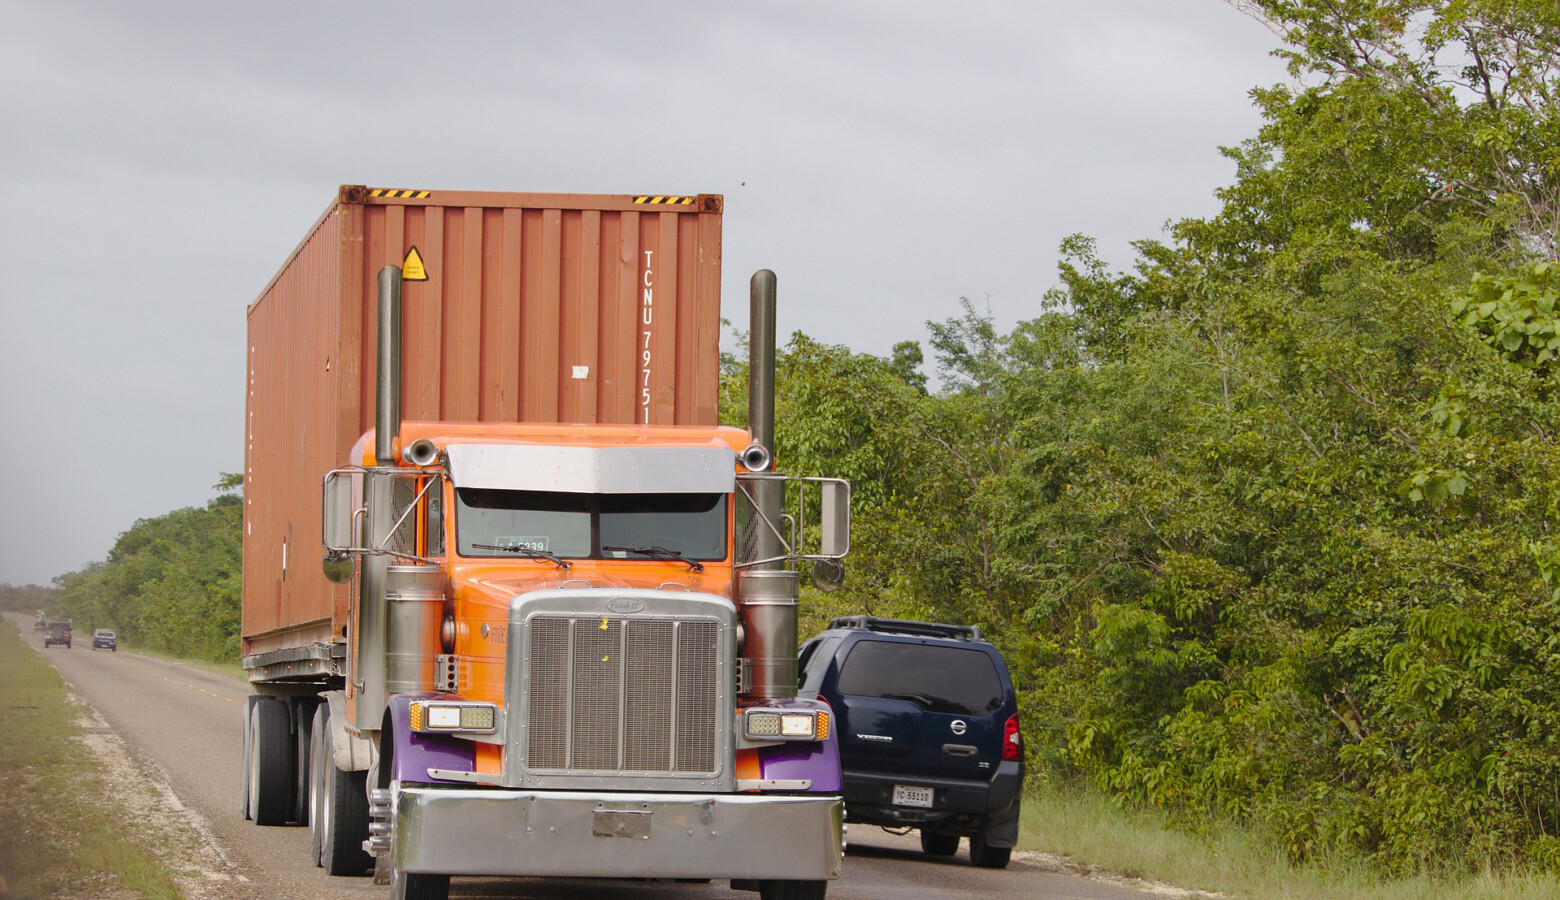 Current law sets the weight limit for trucks at 80,000 pounds. However, if you’re hauling steel, paper or agricultural products, you can get special permits to haul 120,000 pounds. (Pixabay)